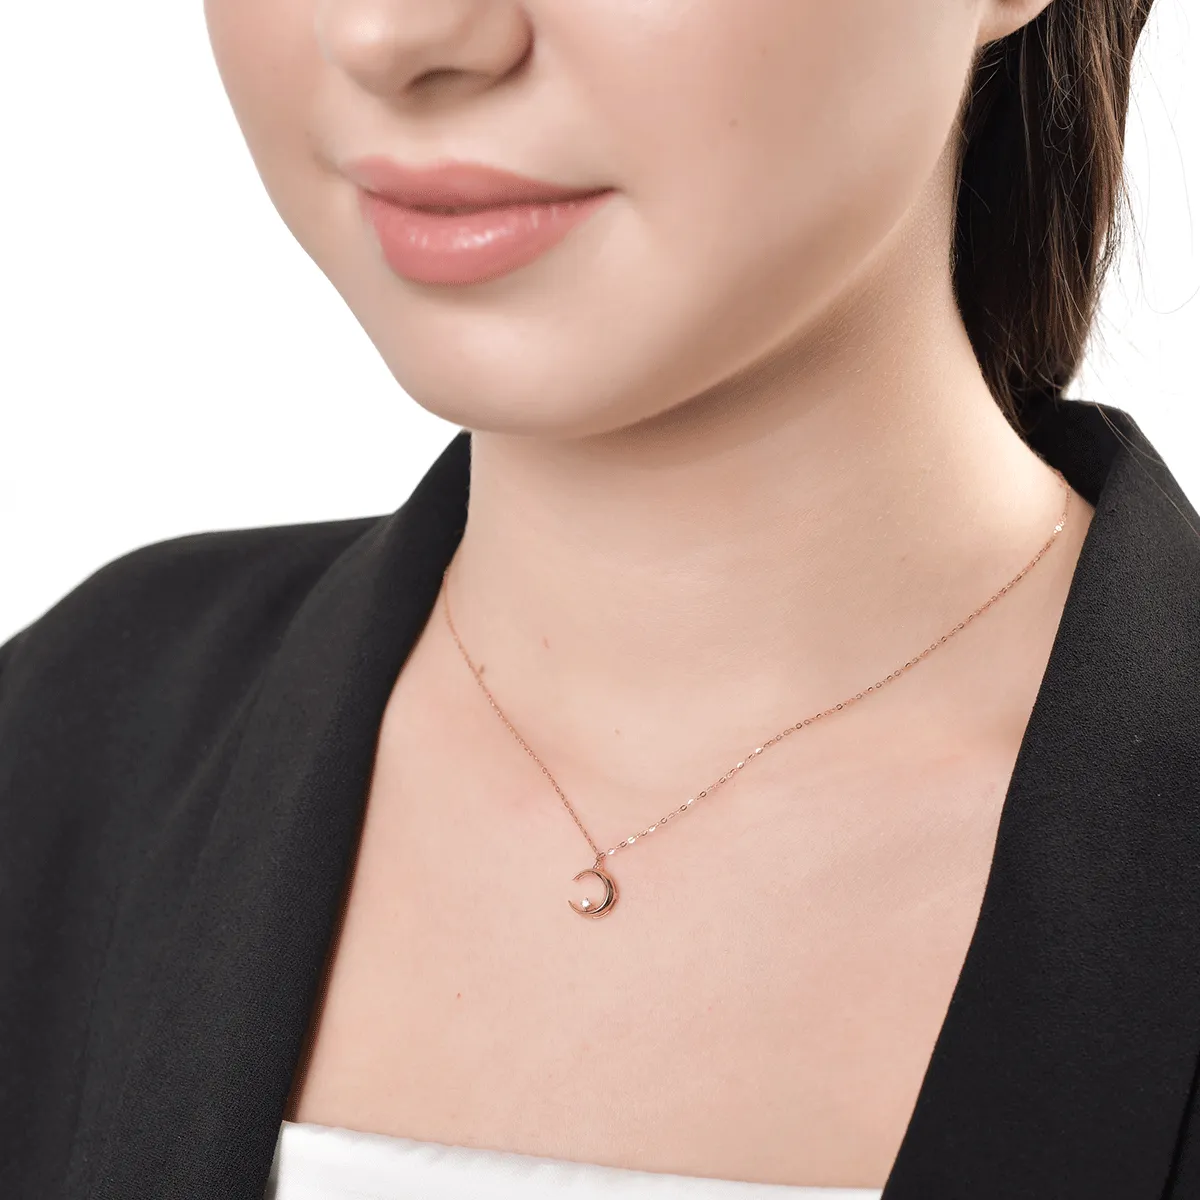 Rose gold pendant necklace with 0.014ct diamonds